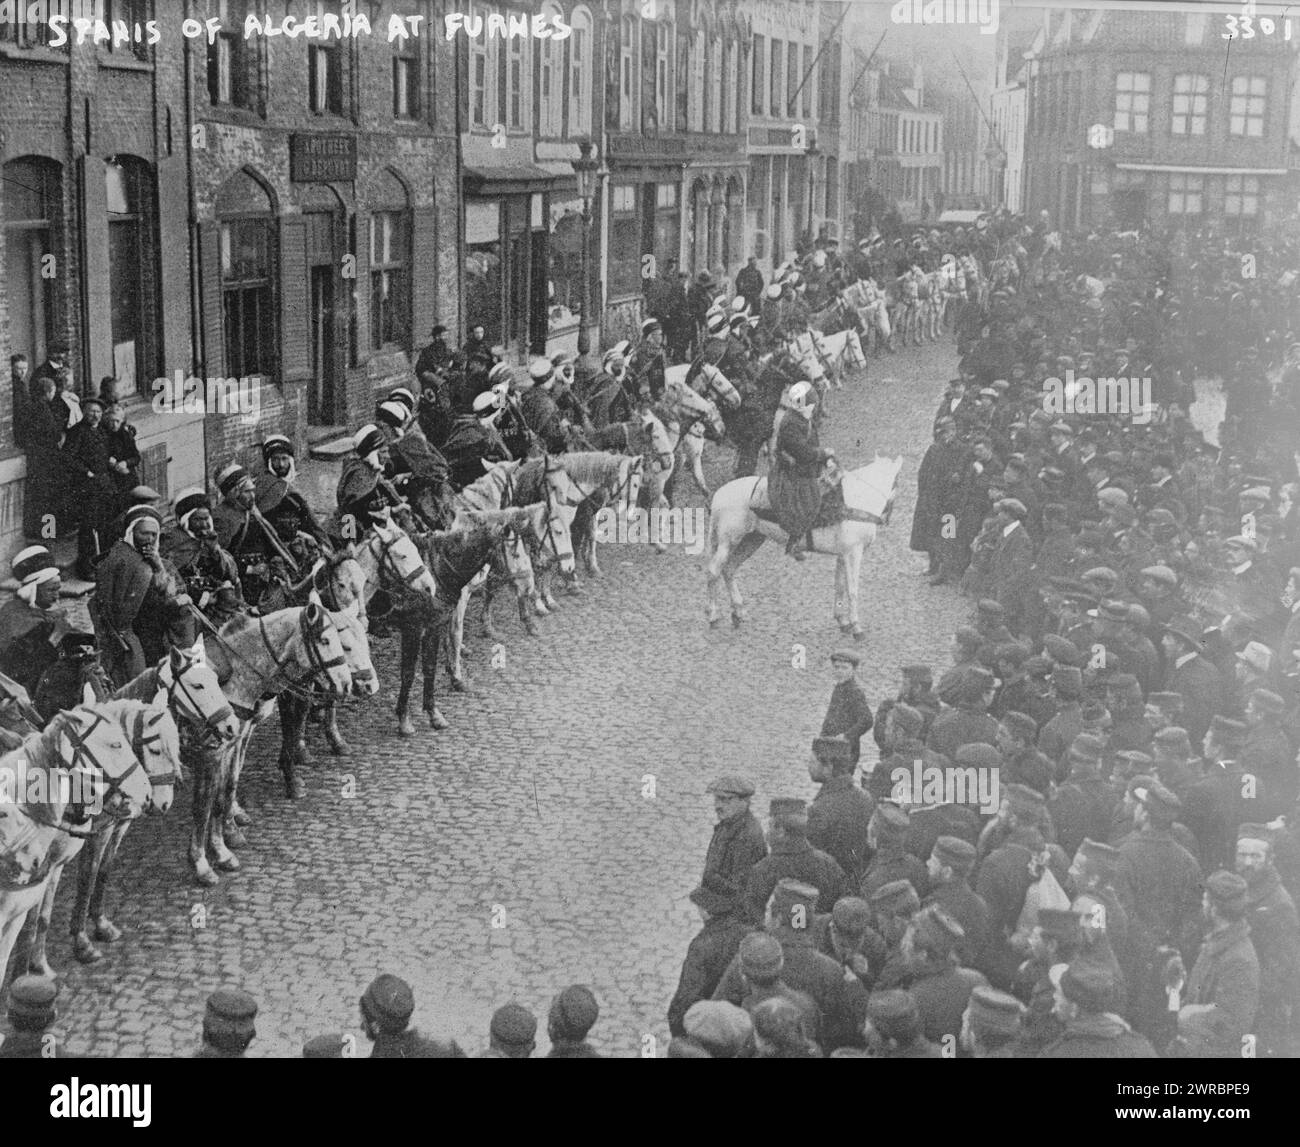 Spahis of Algeria at Furnes, Photograph shows North African troops on horseback in a street, Furnes (Veurne), Belgium during World War I., between ca. 1914 and ca. 1915, World War, 1914-1918, Glass negatives, 1 negative: glass Stock Photo